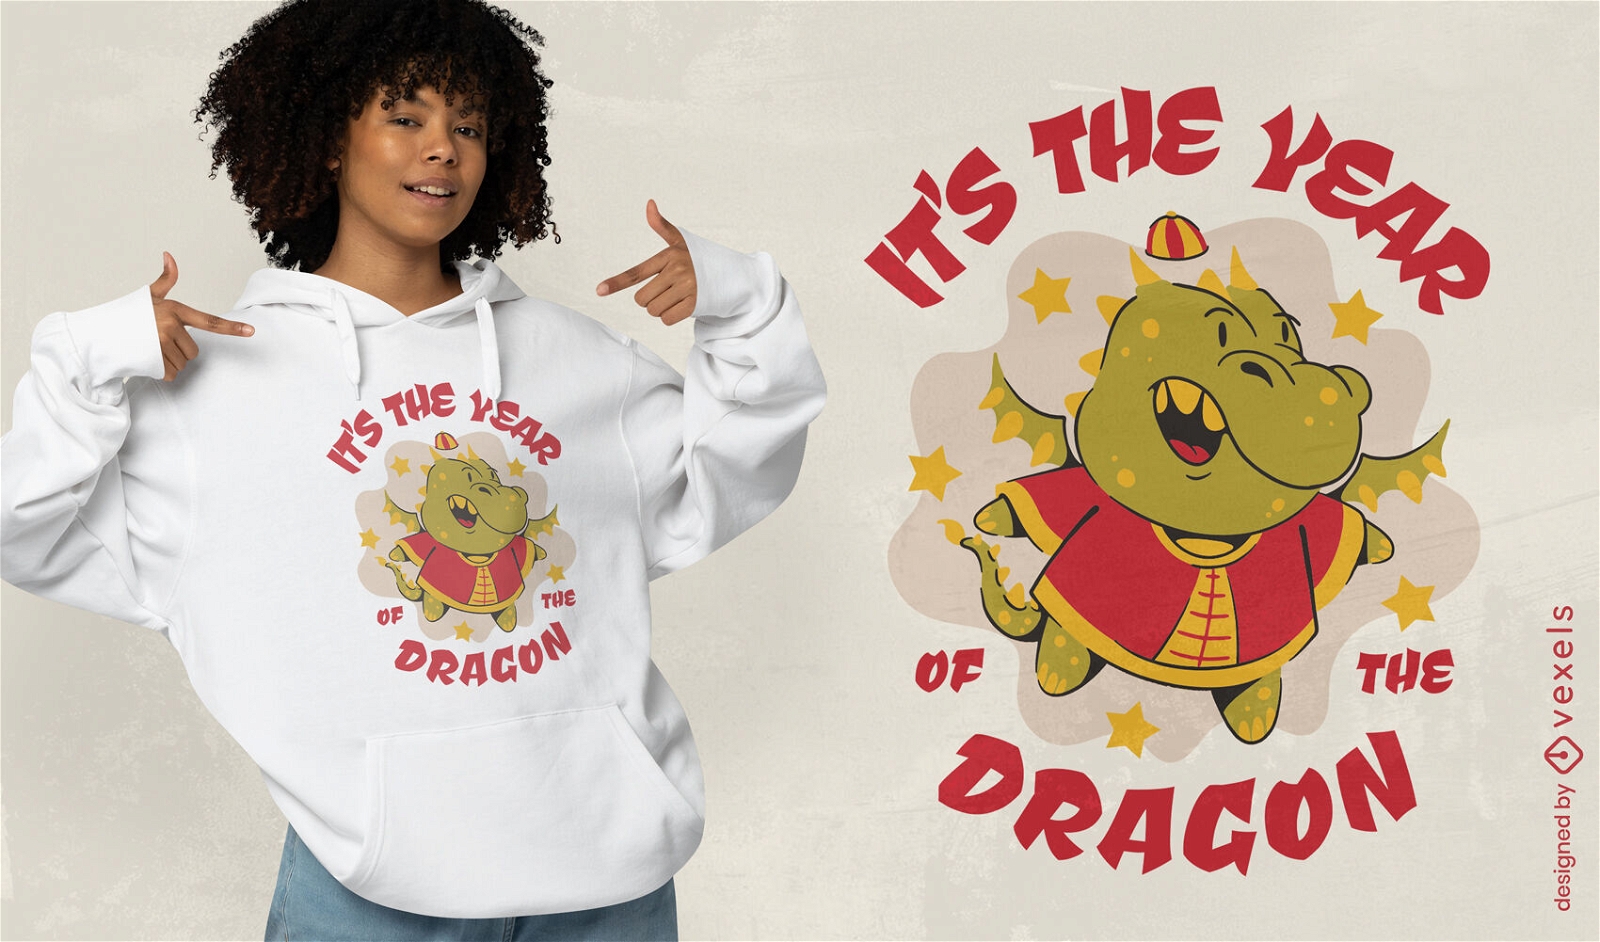 It's the year of the dragon t-shirt design